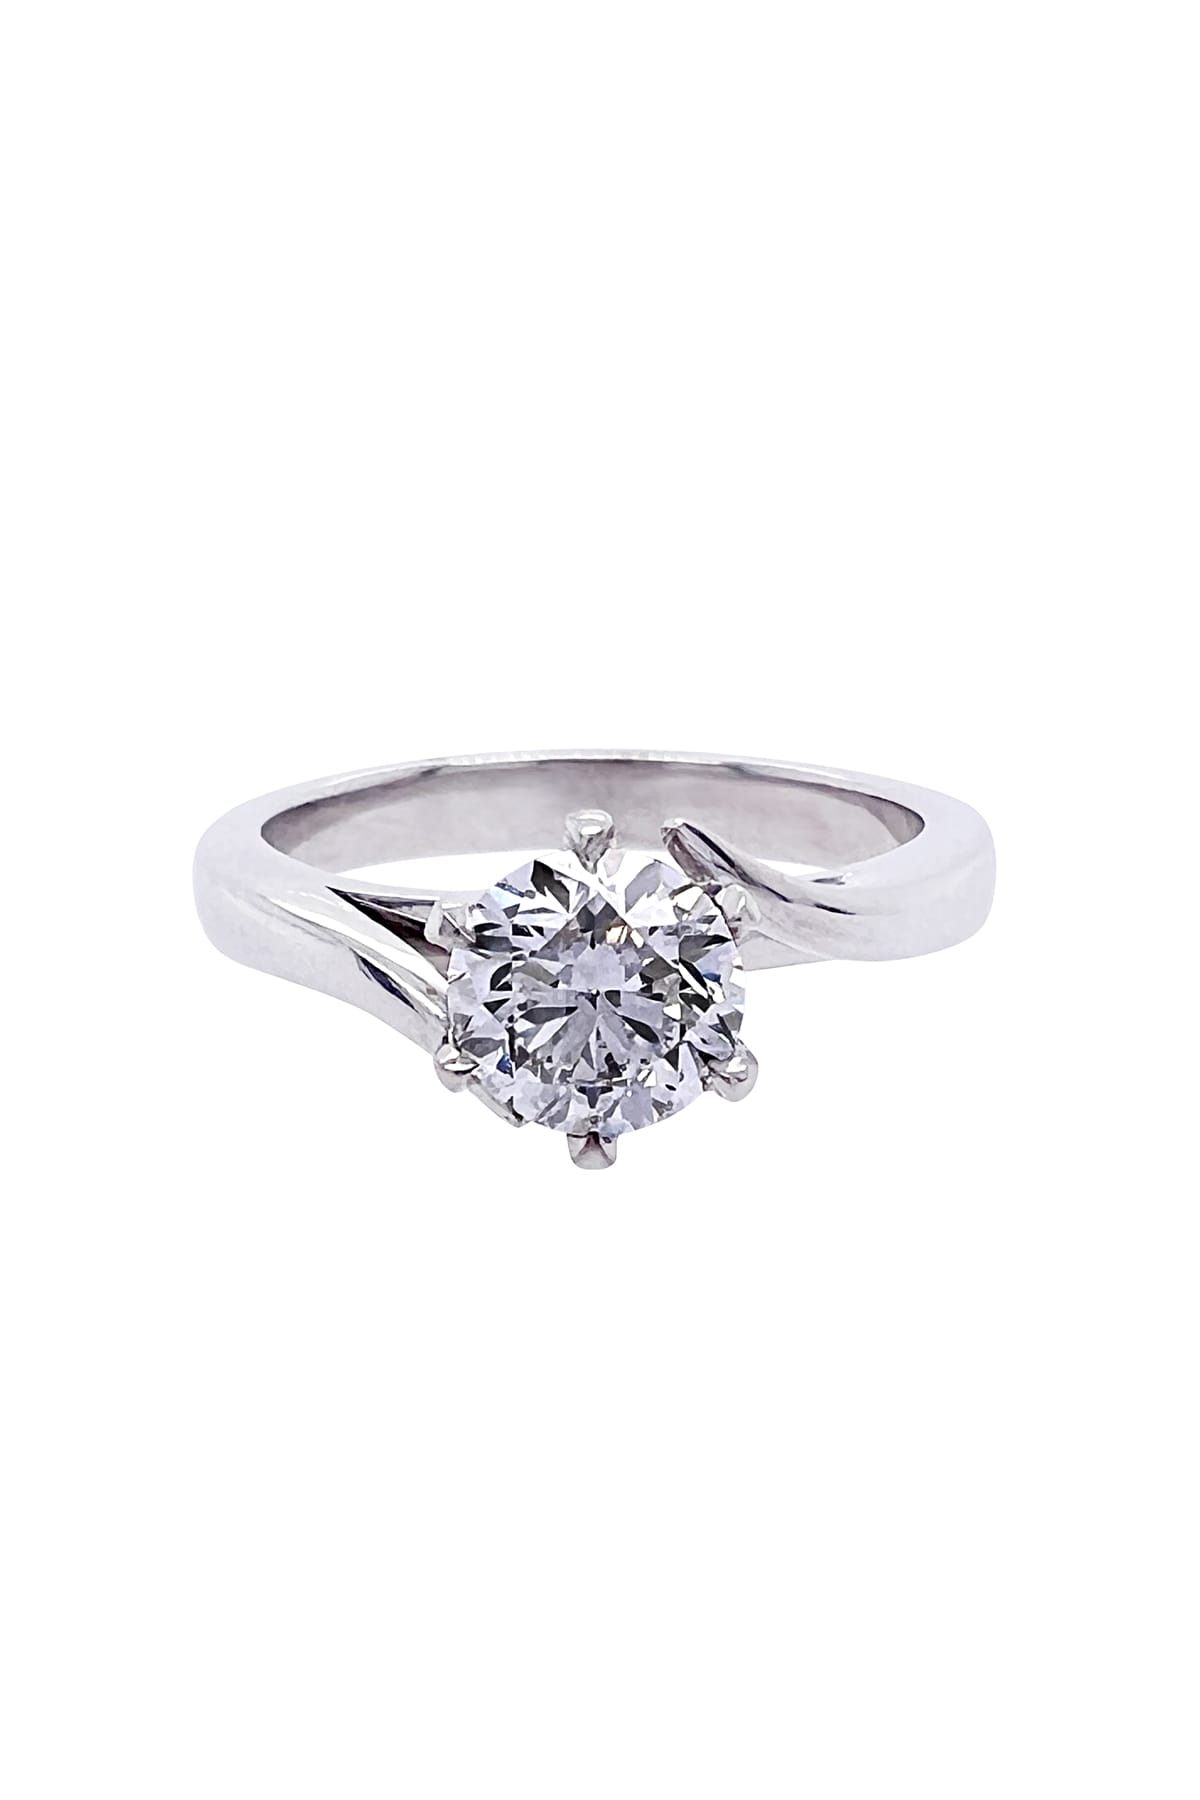 1.01 Carat Solitaire Diamond Engagement Ring available at LeGassick Diamonds and Jewellery Gold Coast, Australia.